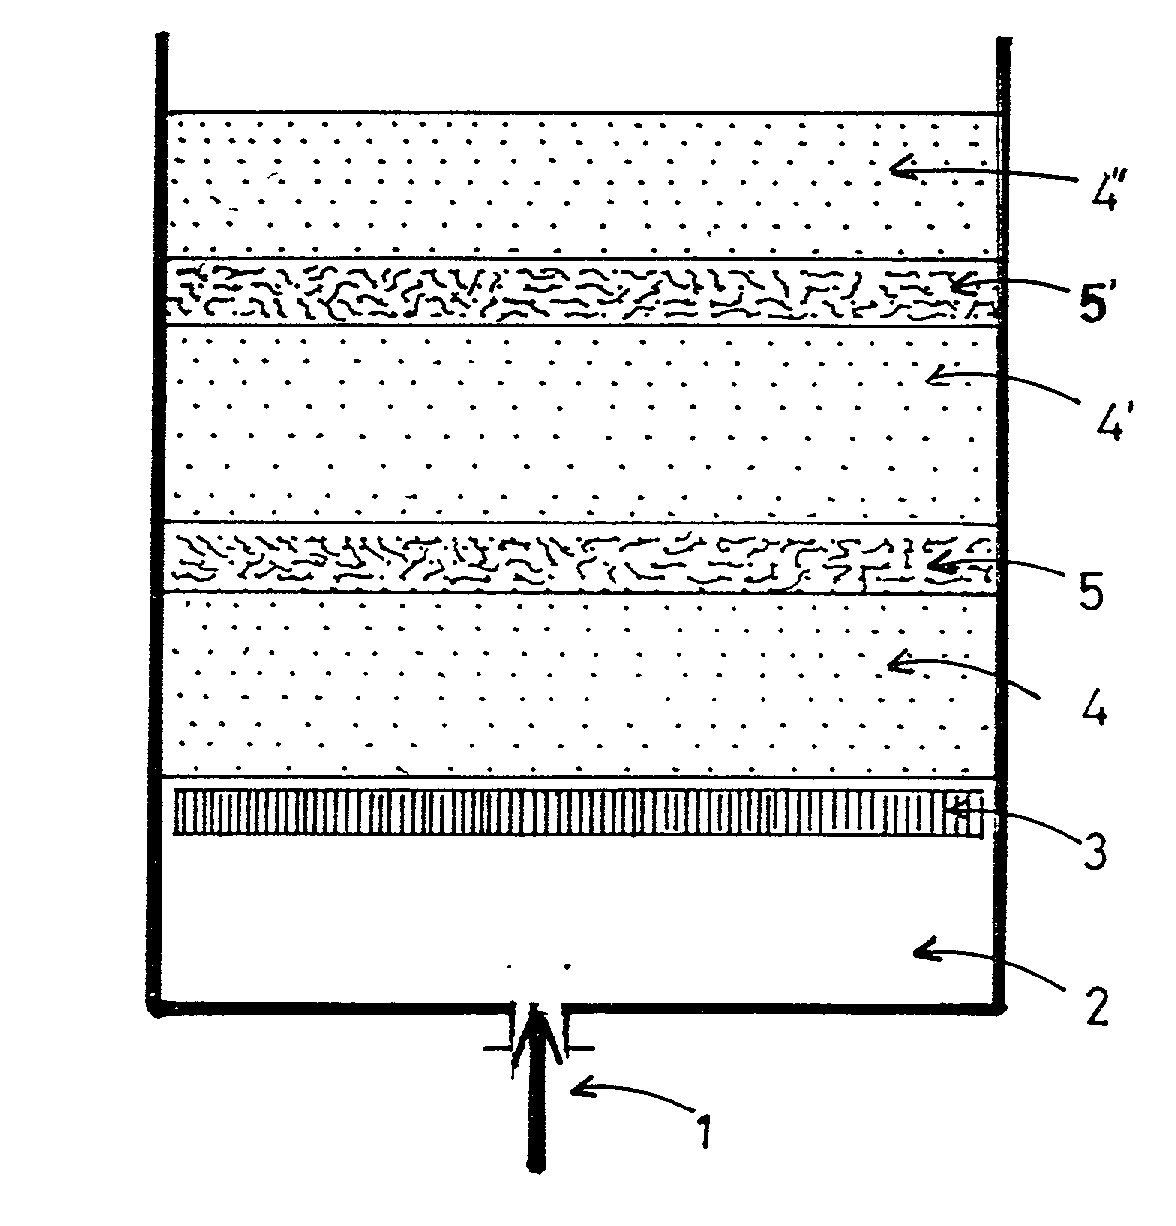 Biological filter for the purification of waste gases